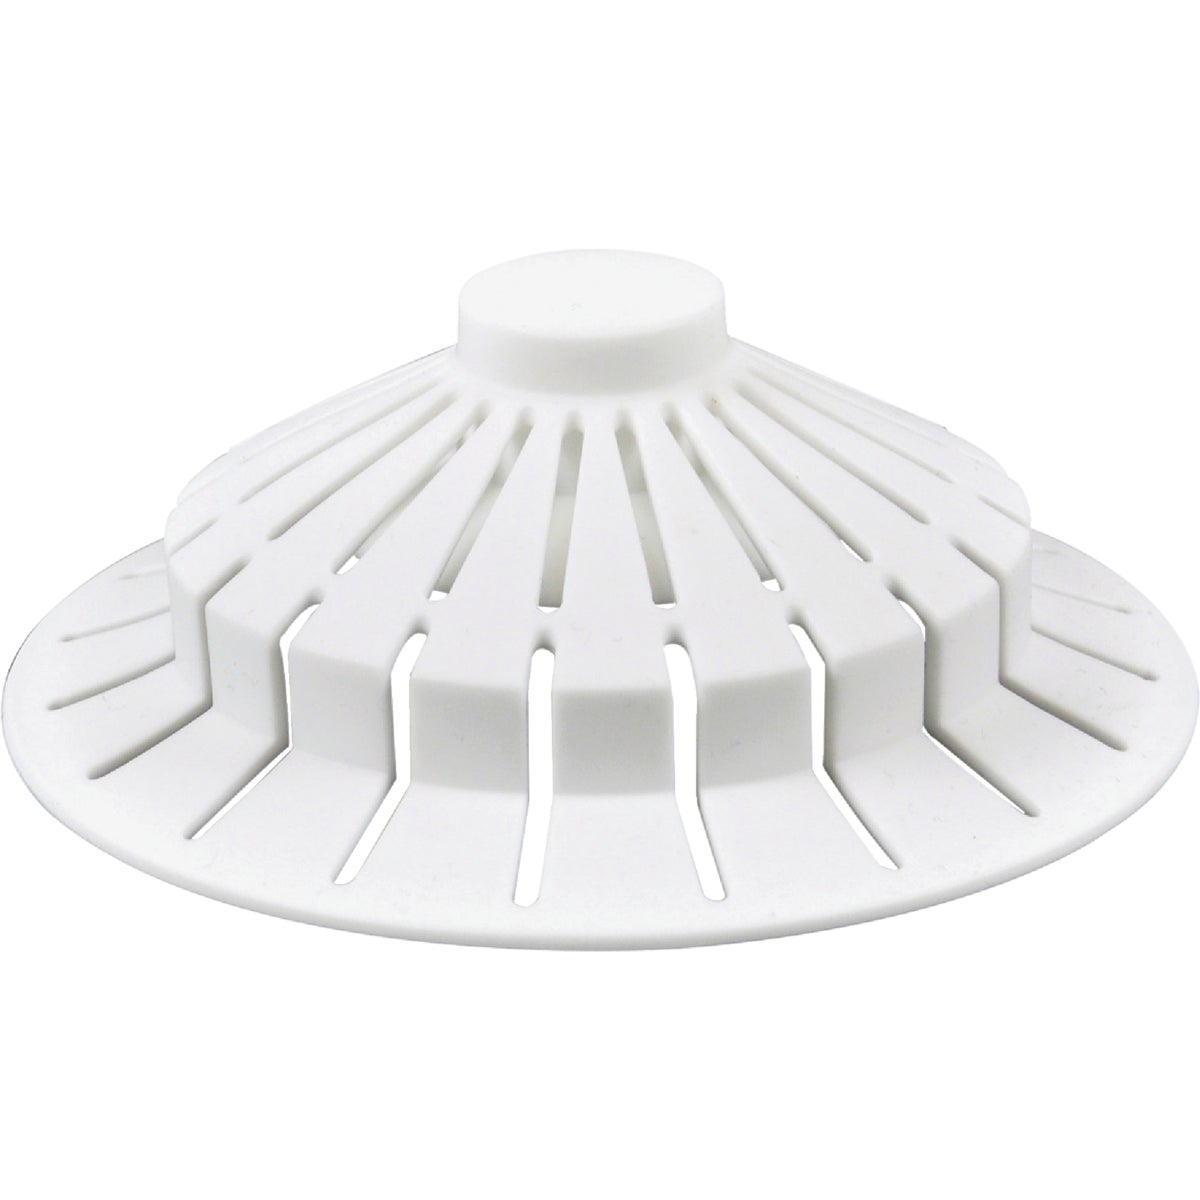 Item 405189, Bathtub drain strainer ideal for catching hair and preventing clogged 